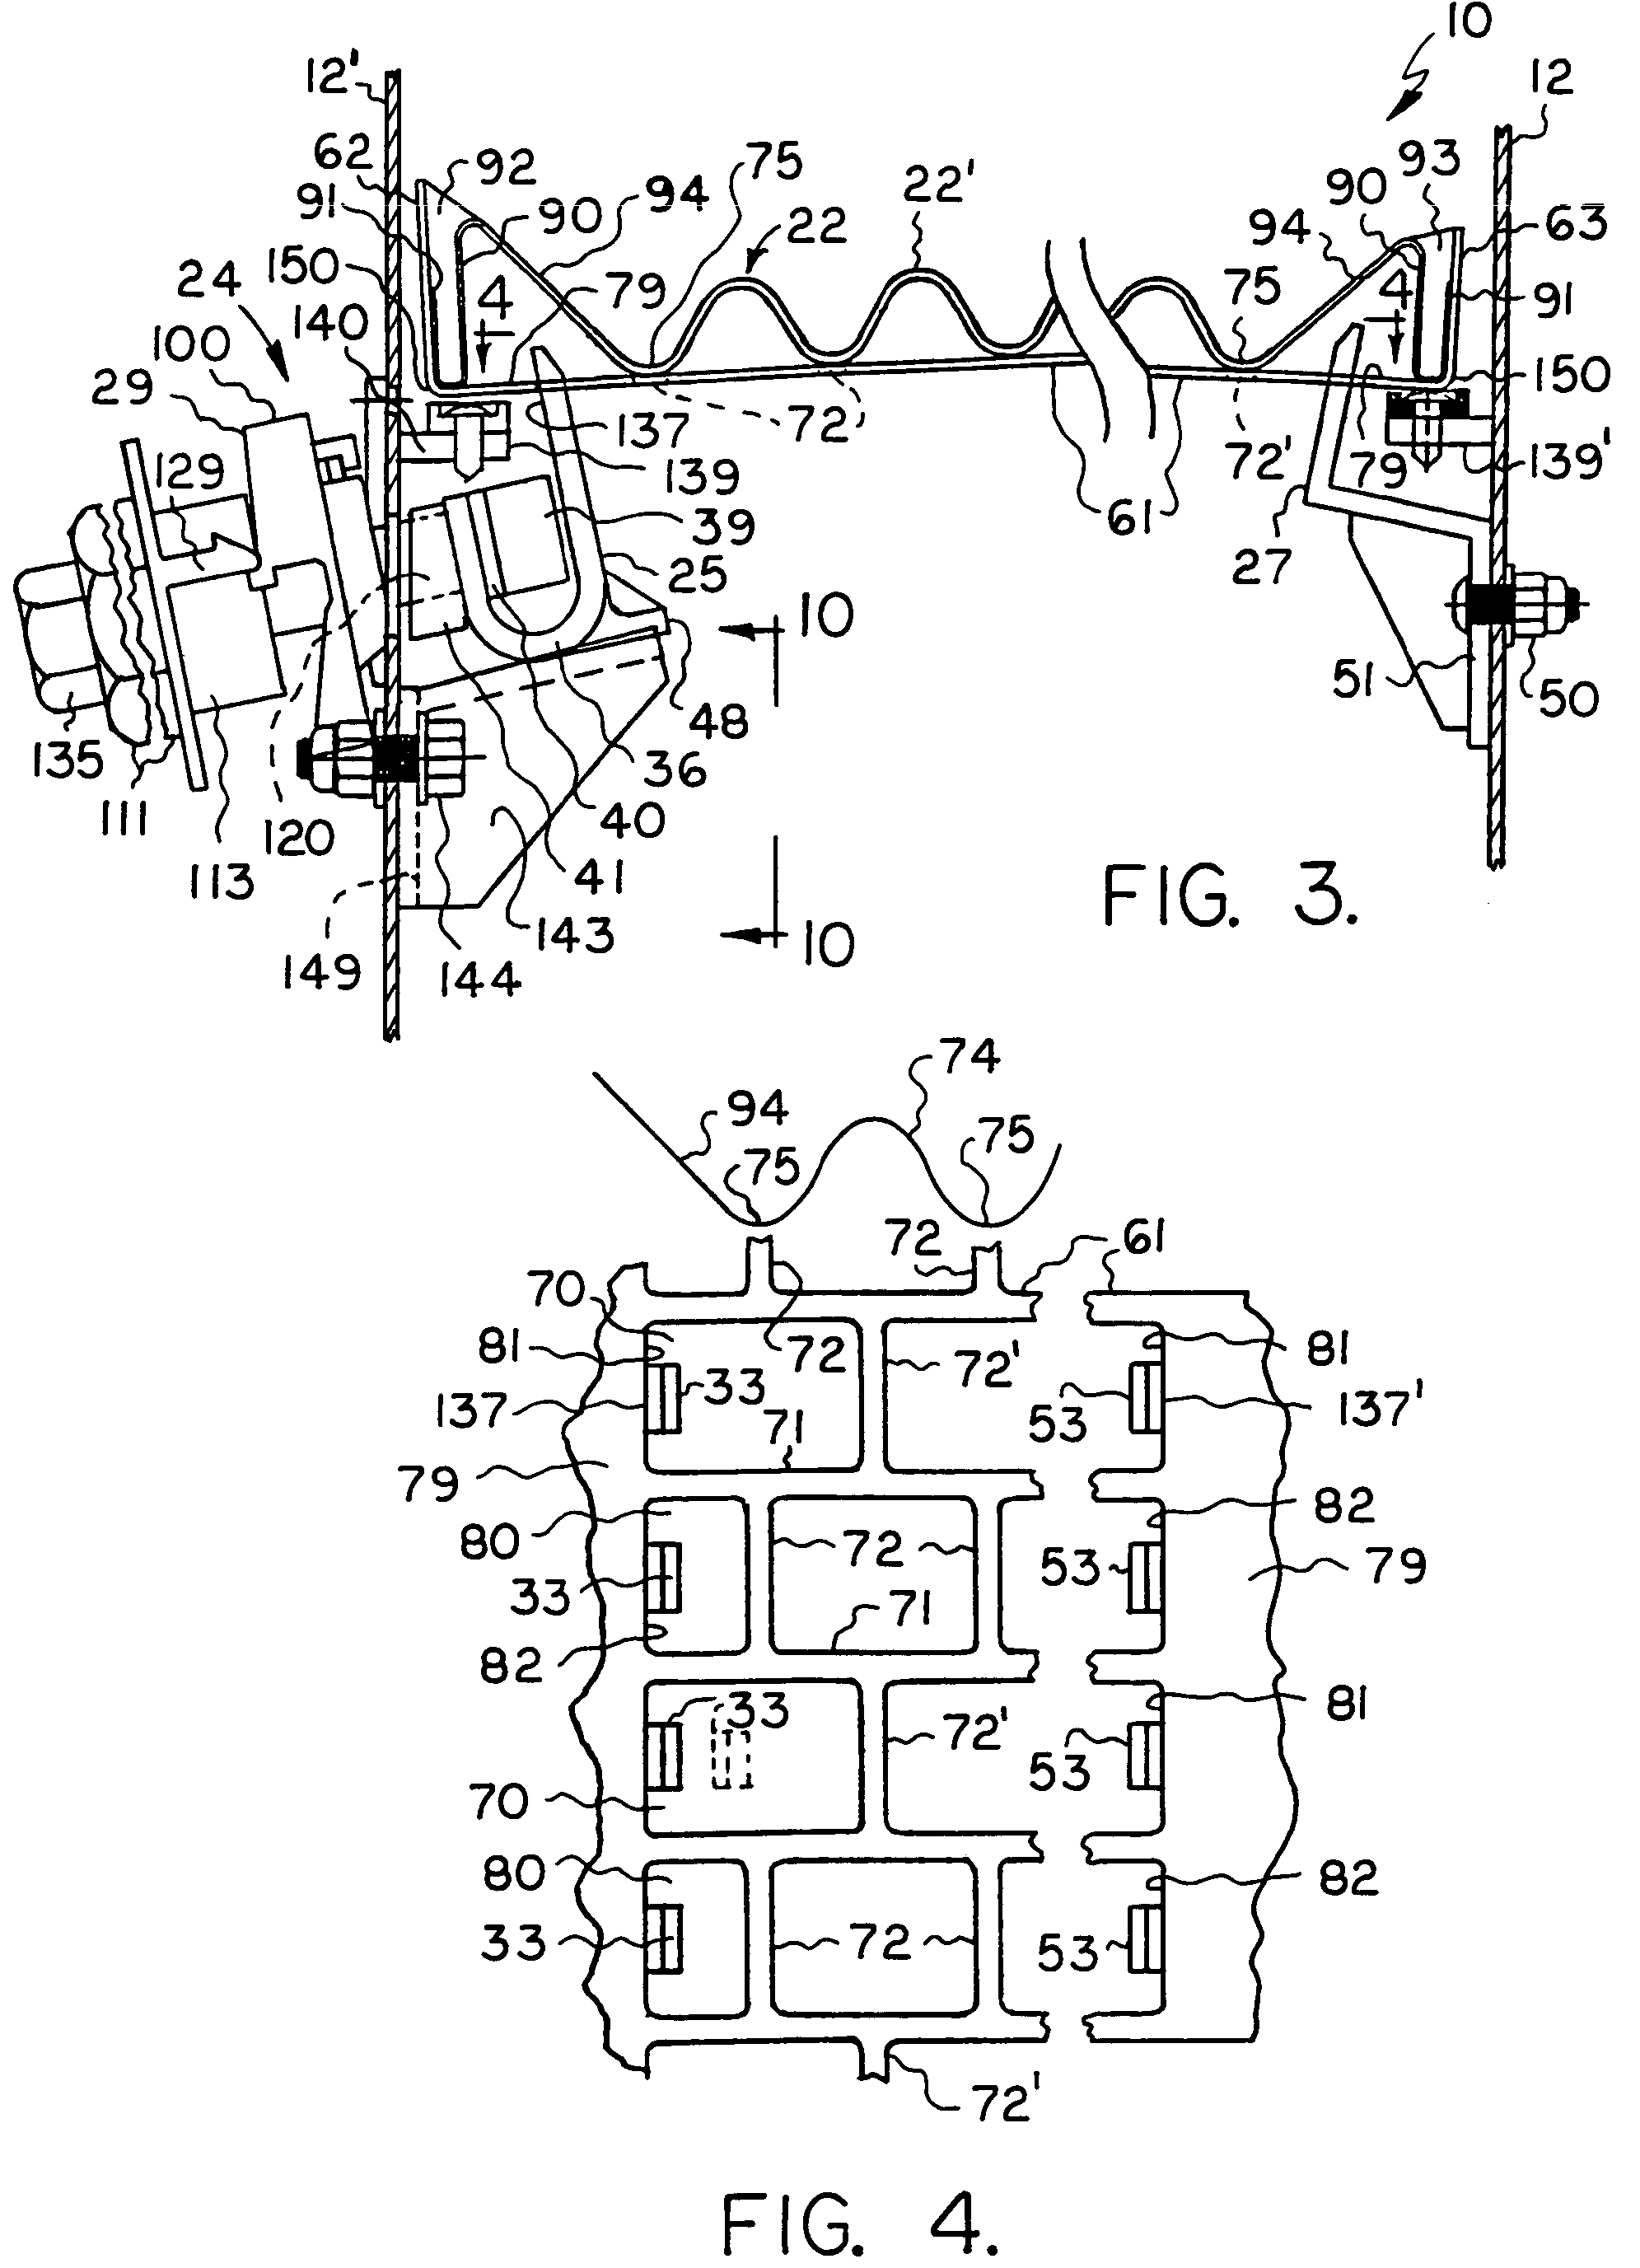 Vibratory screening machine and vibratory screen and screen tensioning structure